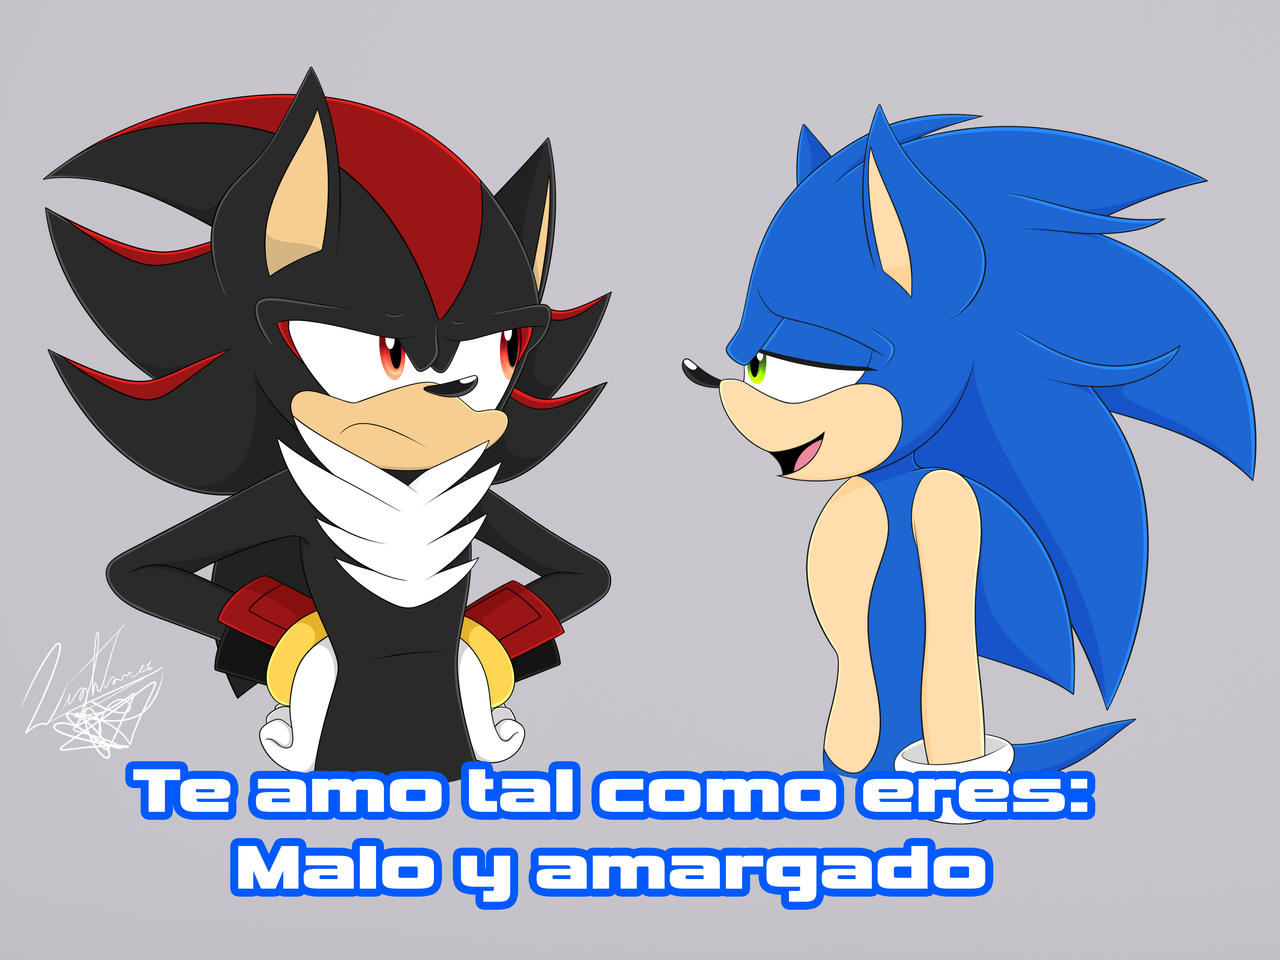 Sonic and Shadow-LineArt by thedangoking on DeviantArt